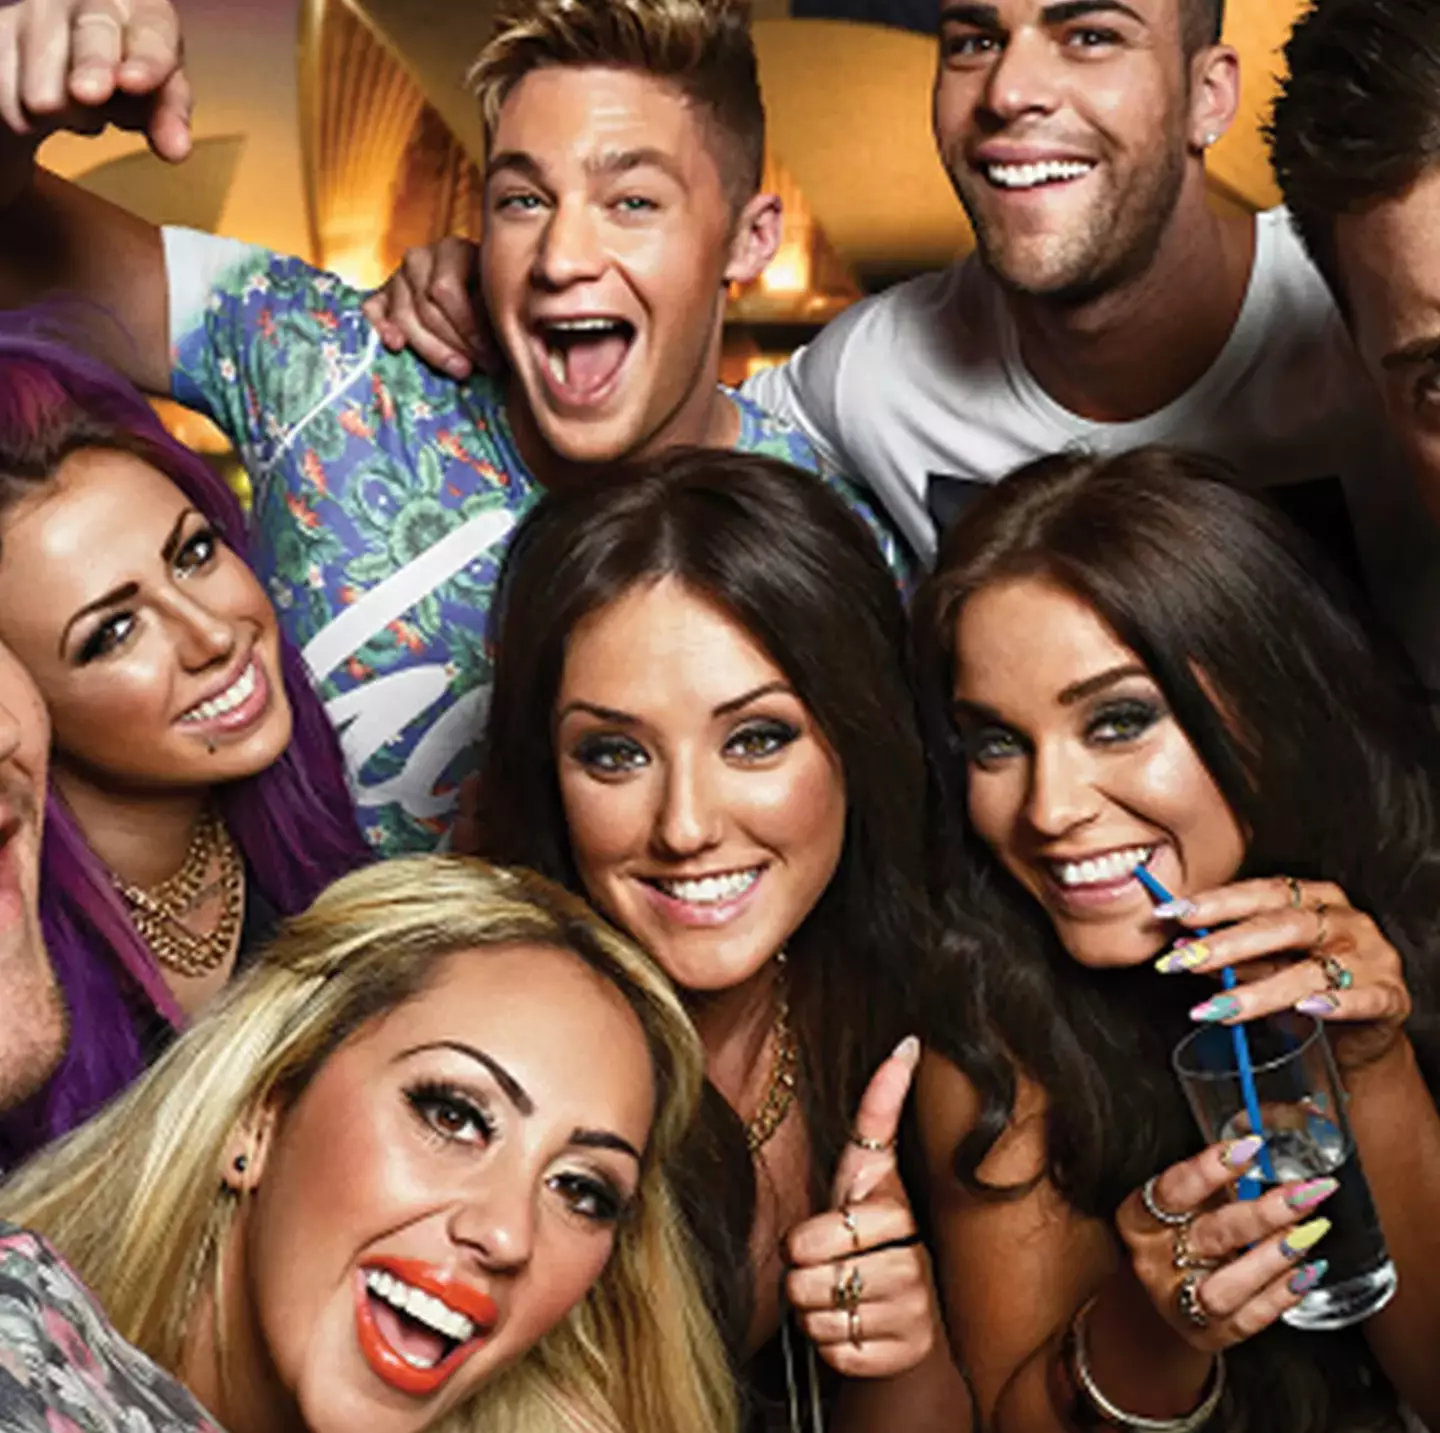 Charlotte first appeared on MTV's Geordie Shore back in 2011.